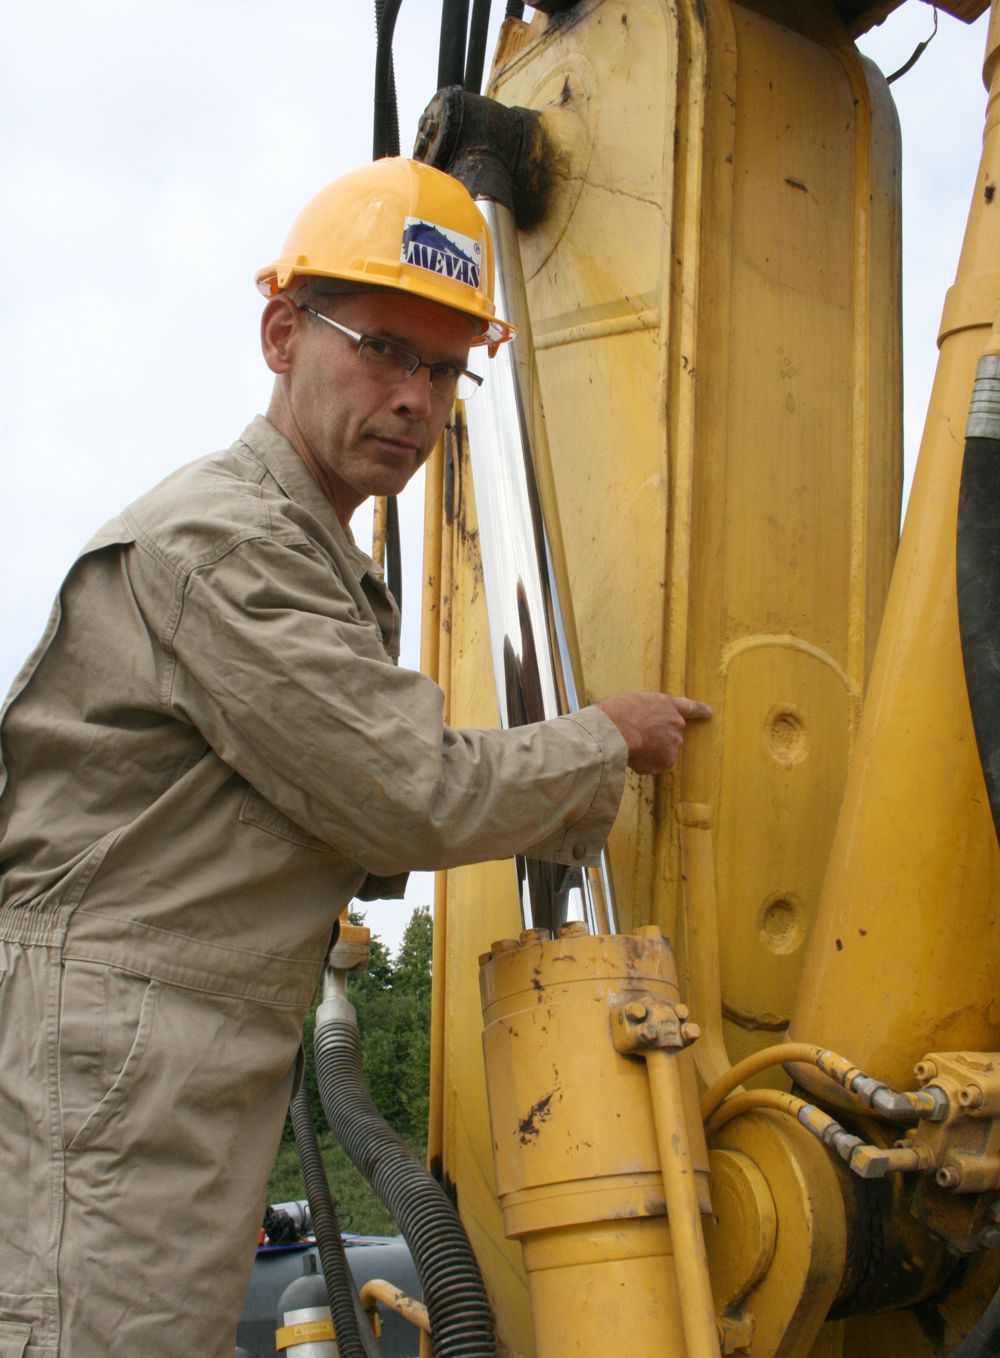 How to buy used heavy machinery in a safe way